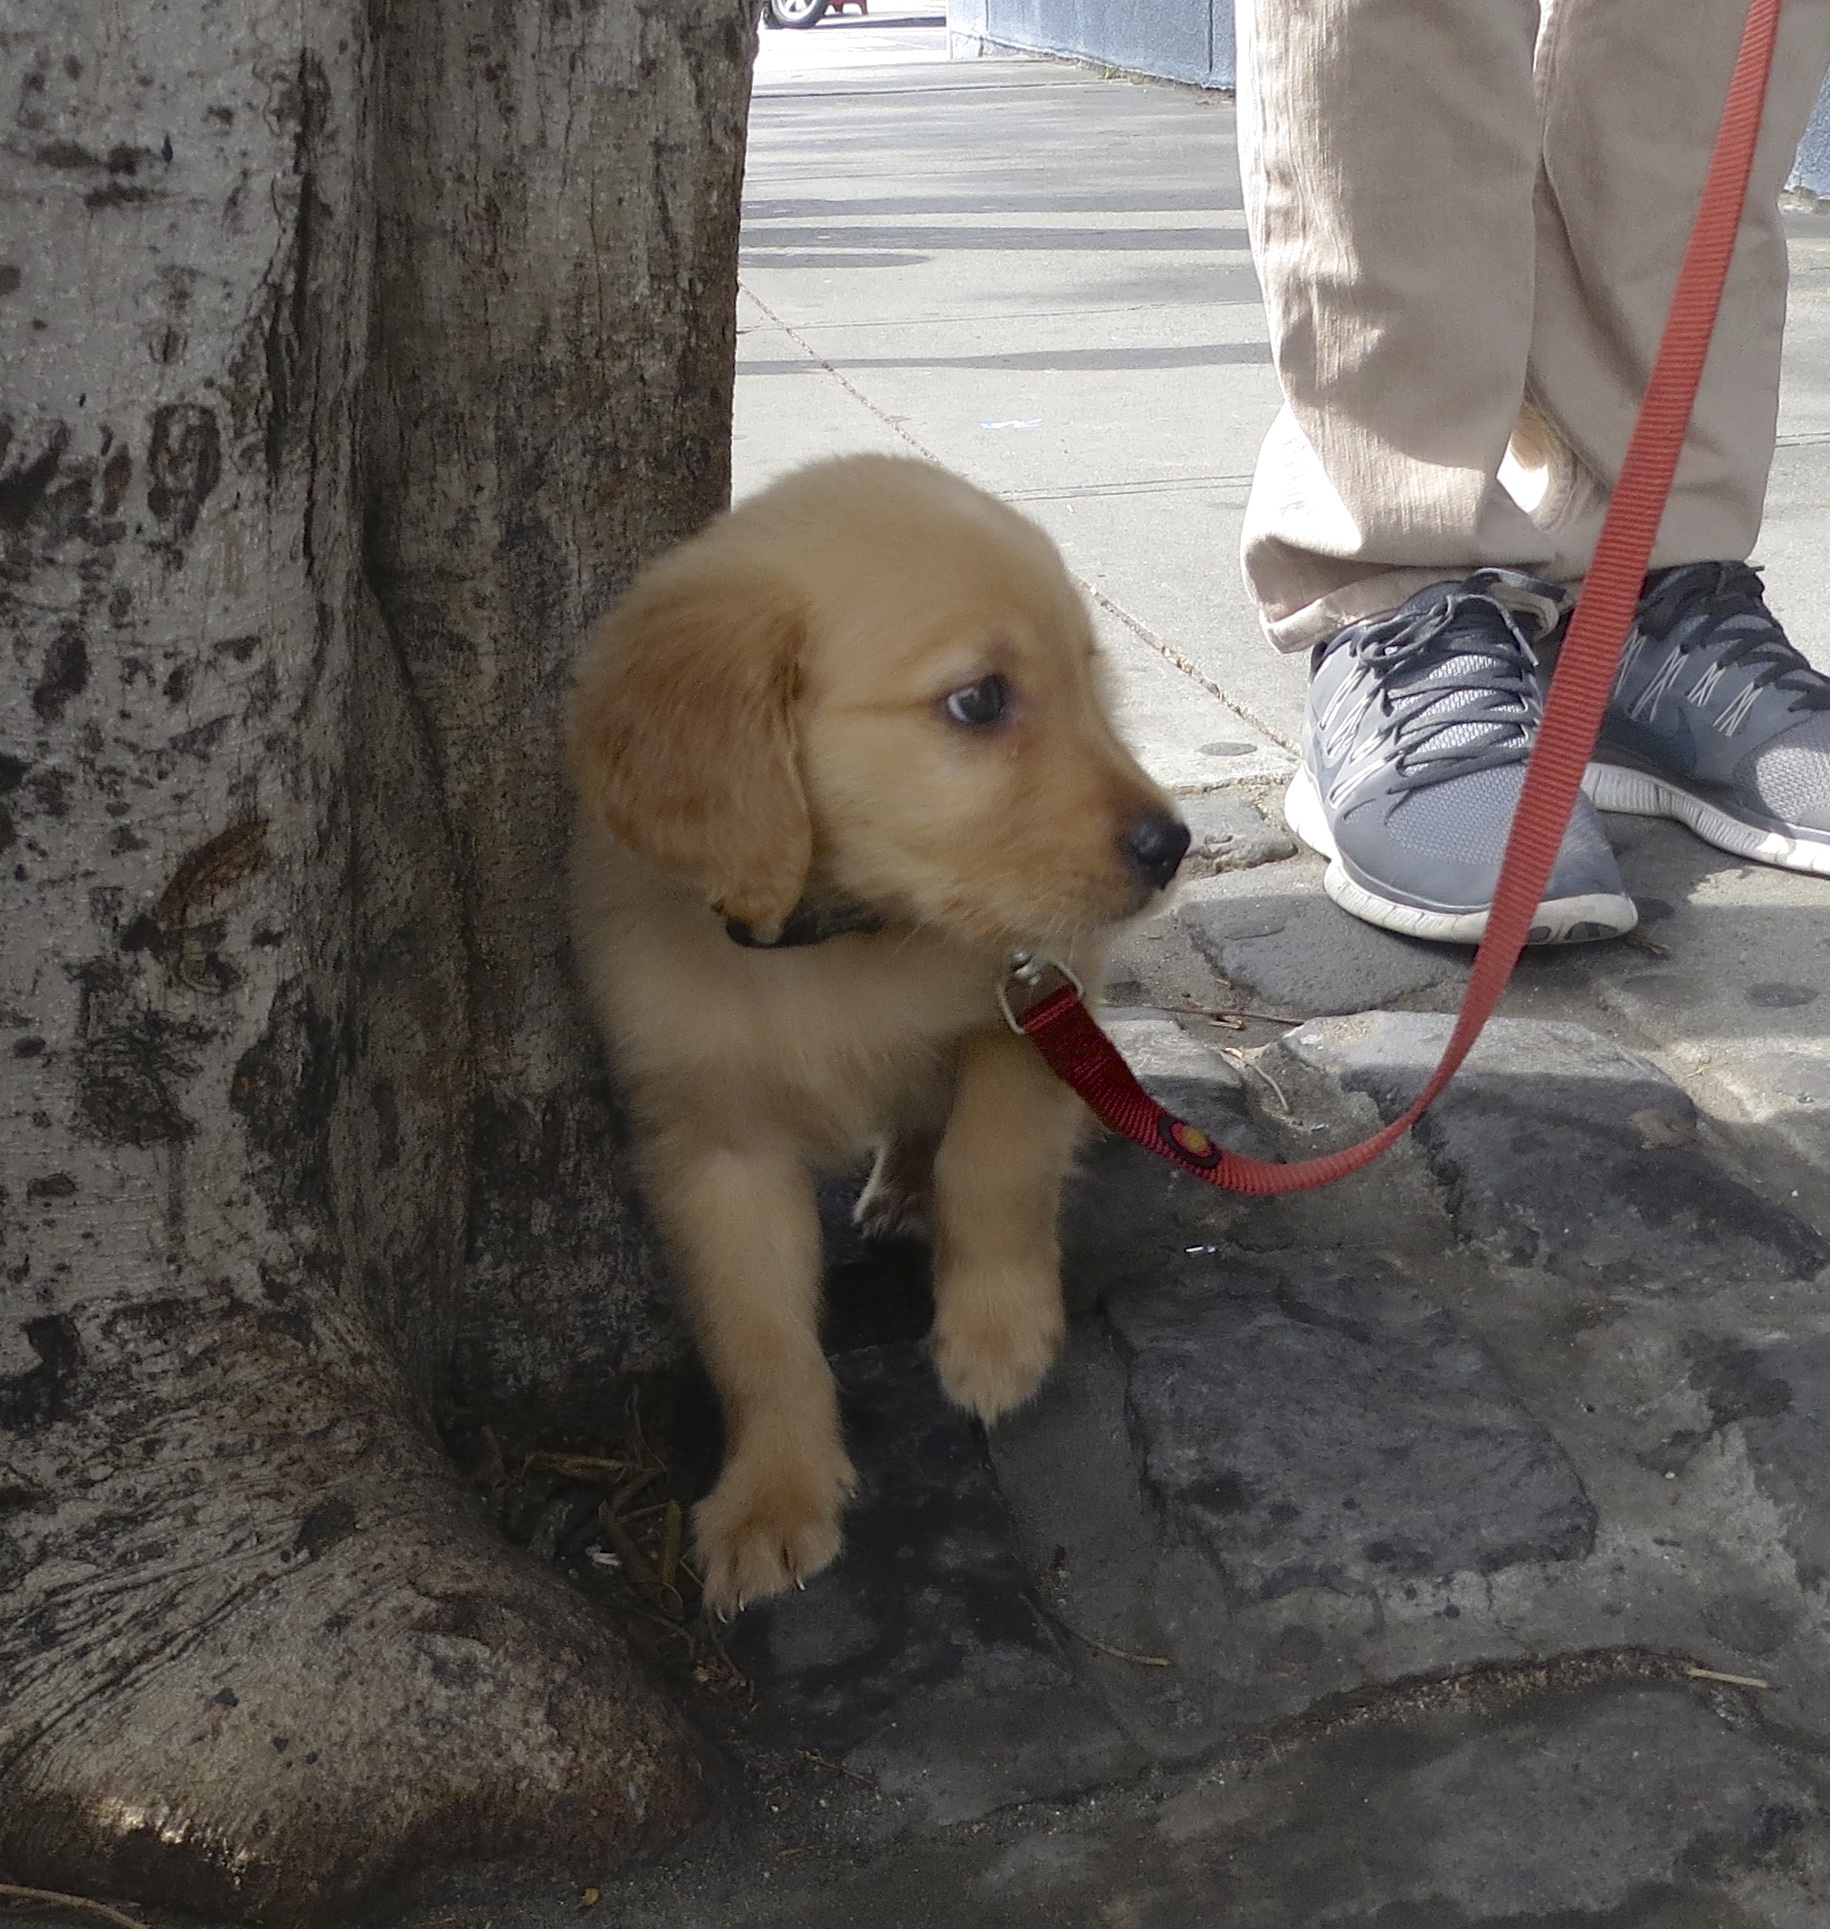 8-Week-Old Ridiculously Adorable Golden Retriever Puppy Leaning Against A Tree